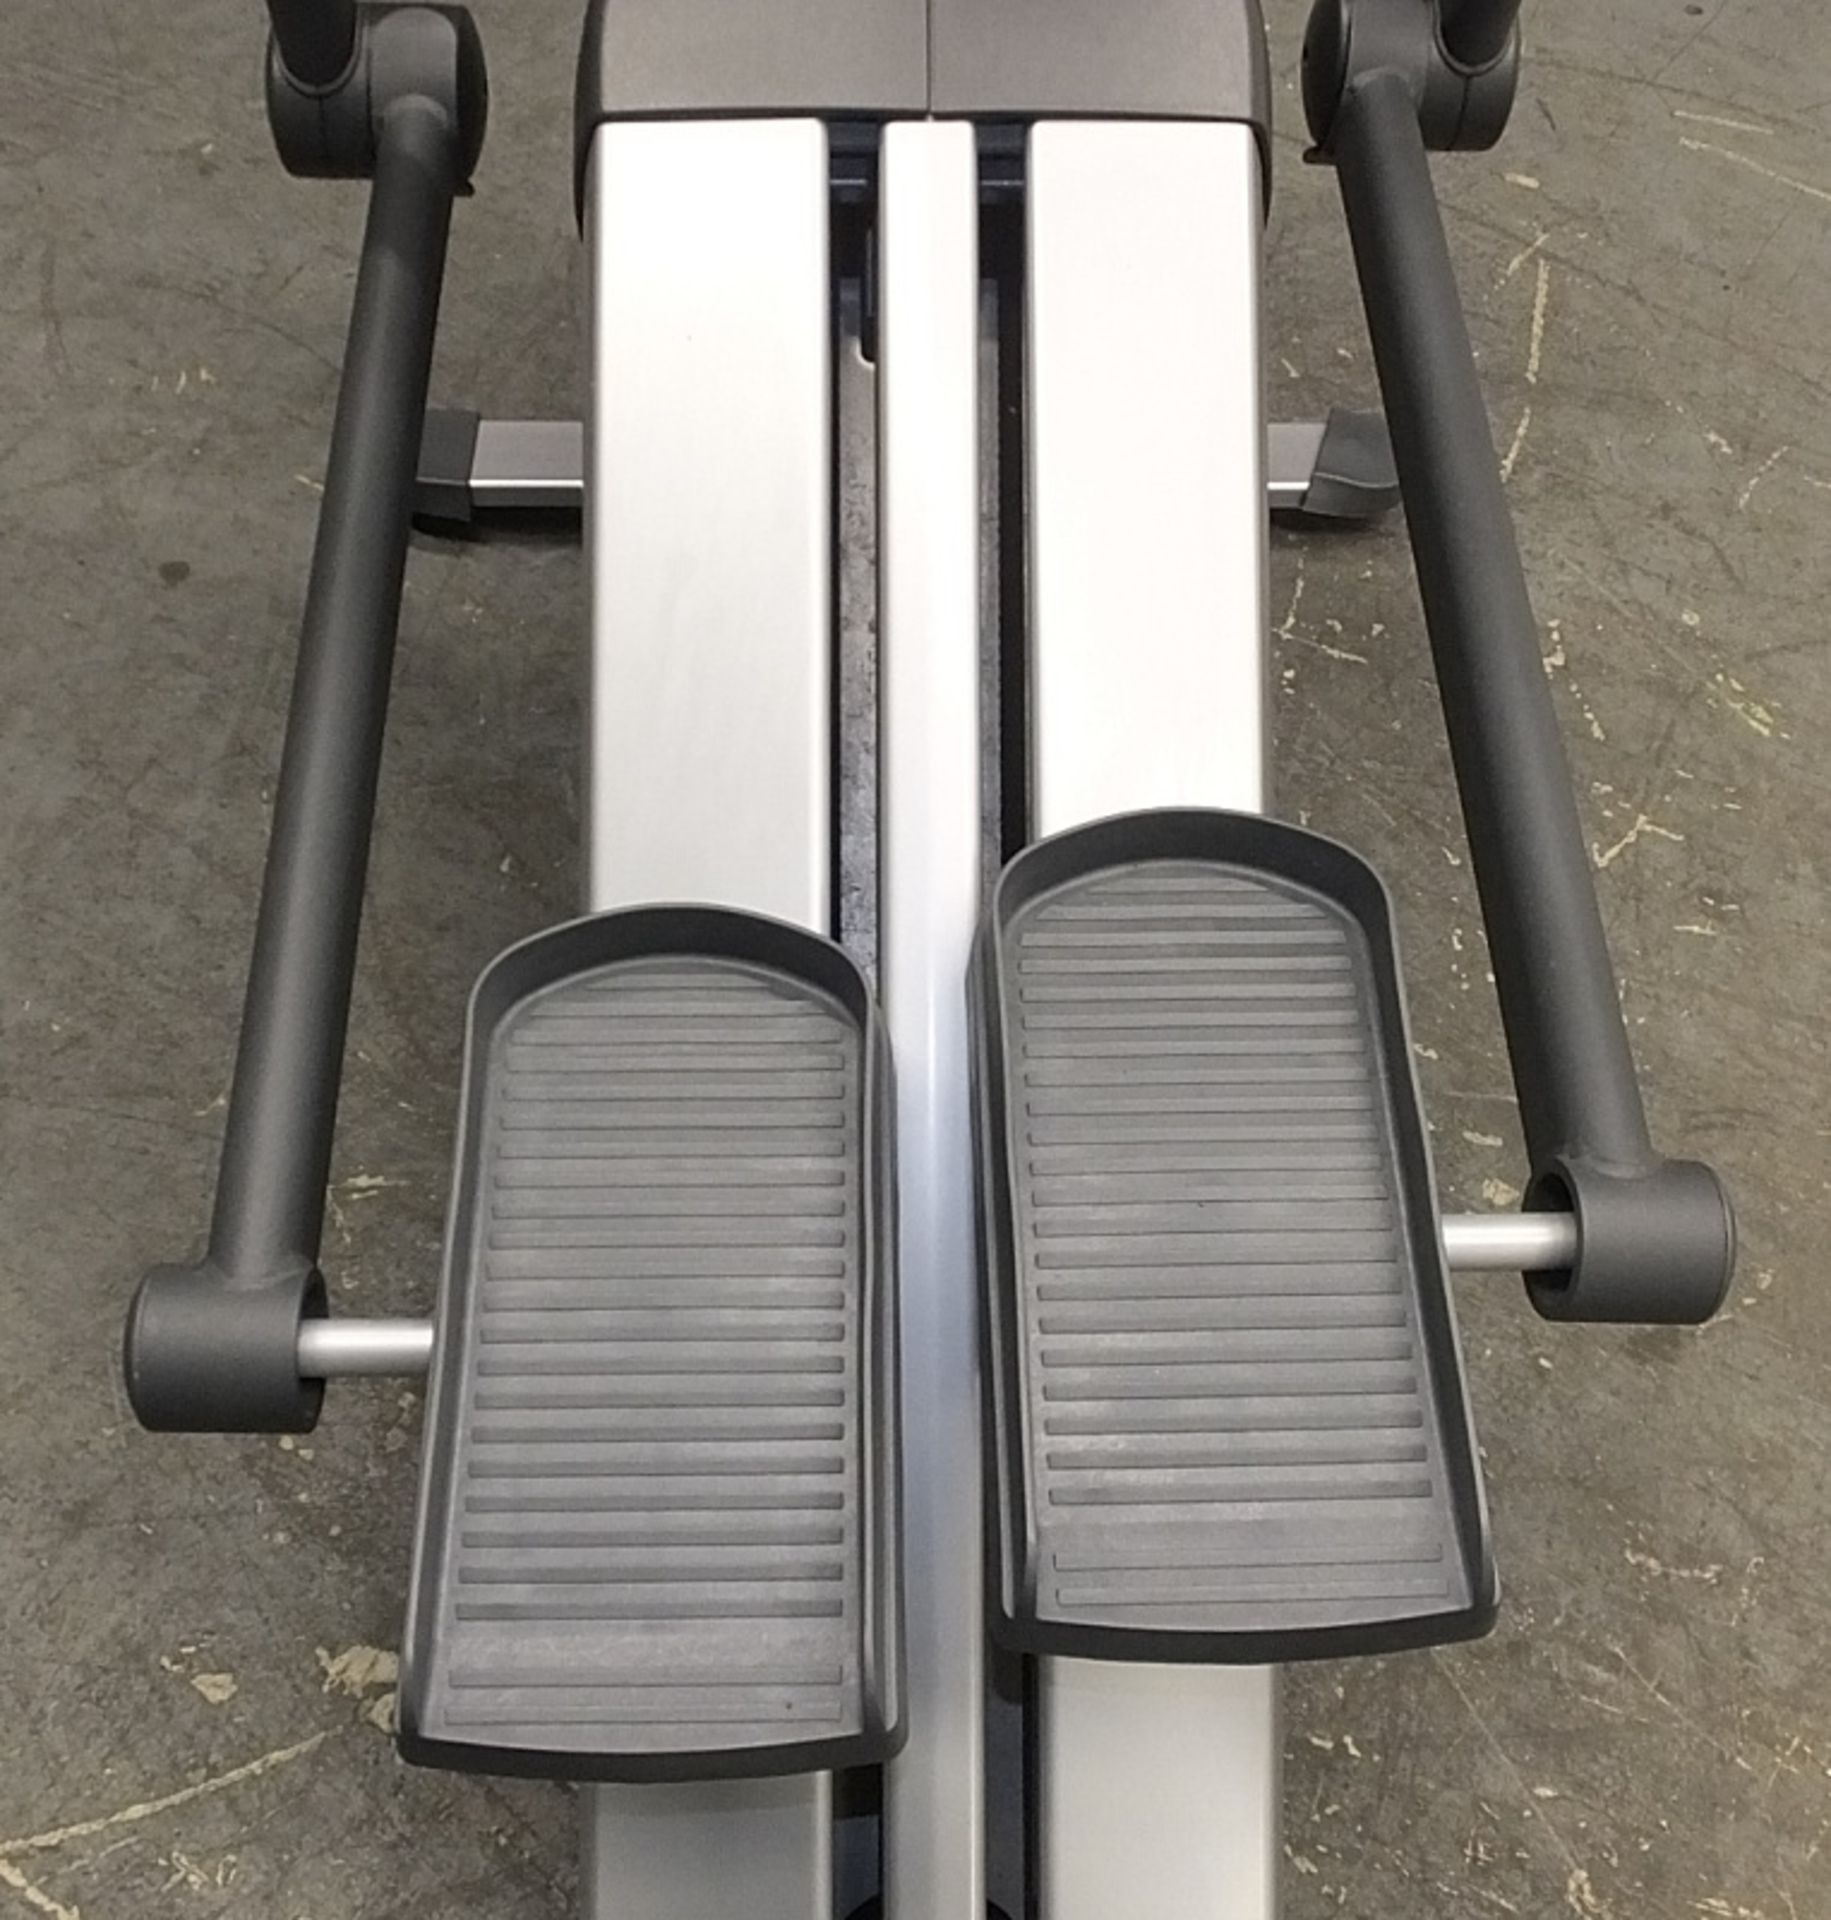 Life Fitness CLSL Stepper/Summit Trainer - L1700 x D800 x H1830mm - Image 4 of 14